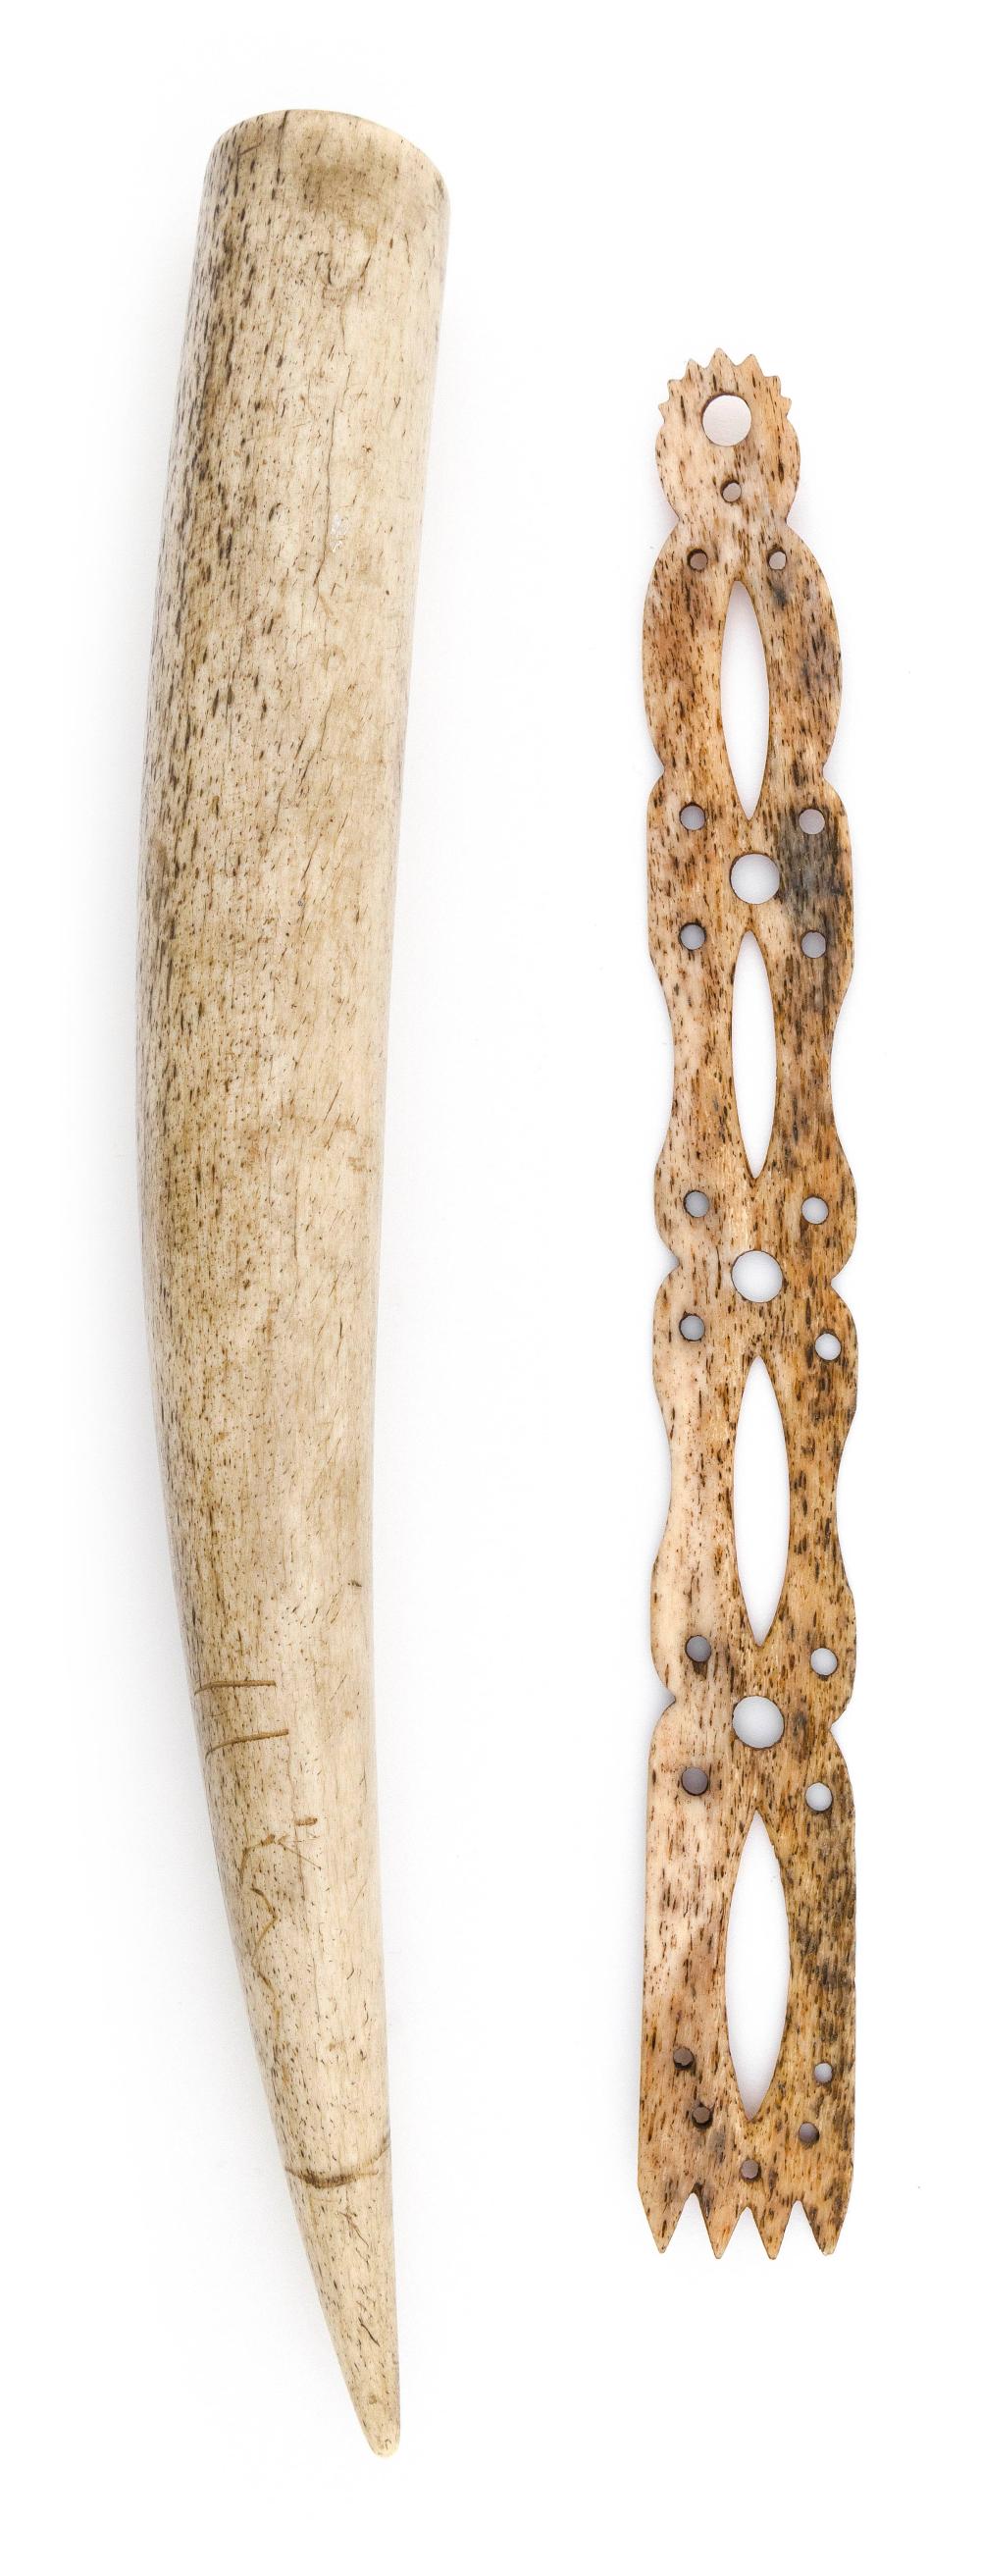 TWO WHALEBONE ITEMS 19TH CENTURYTWO